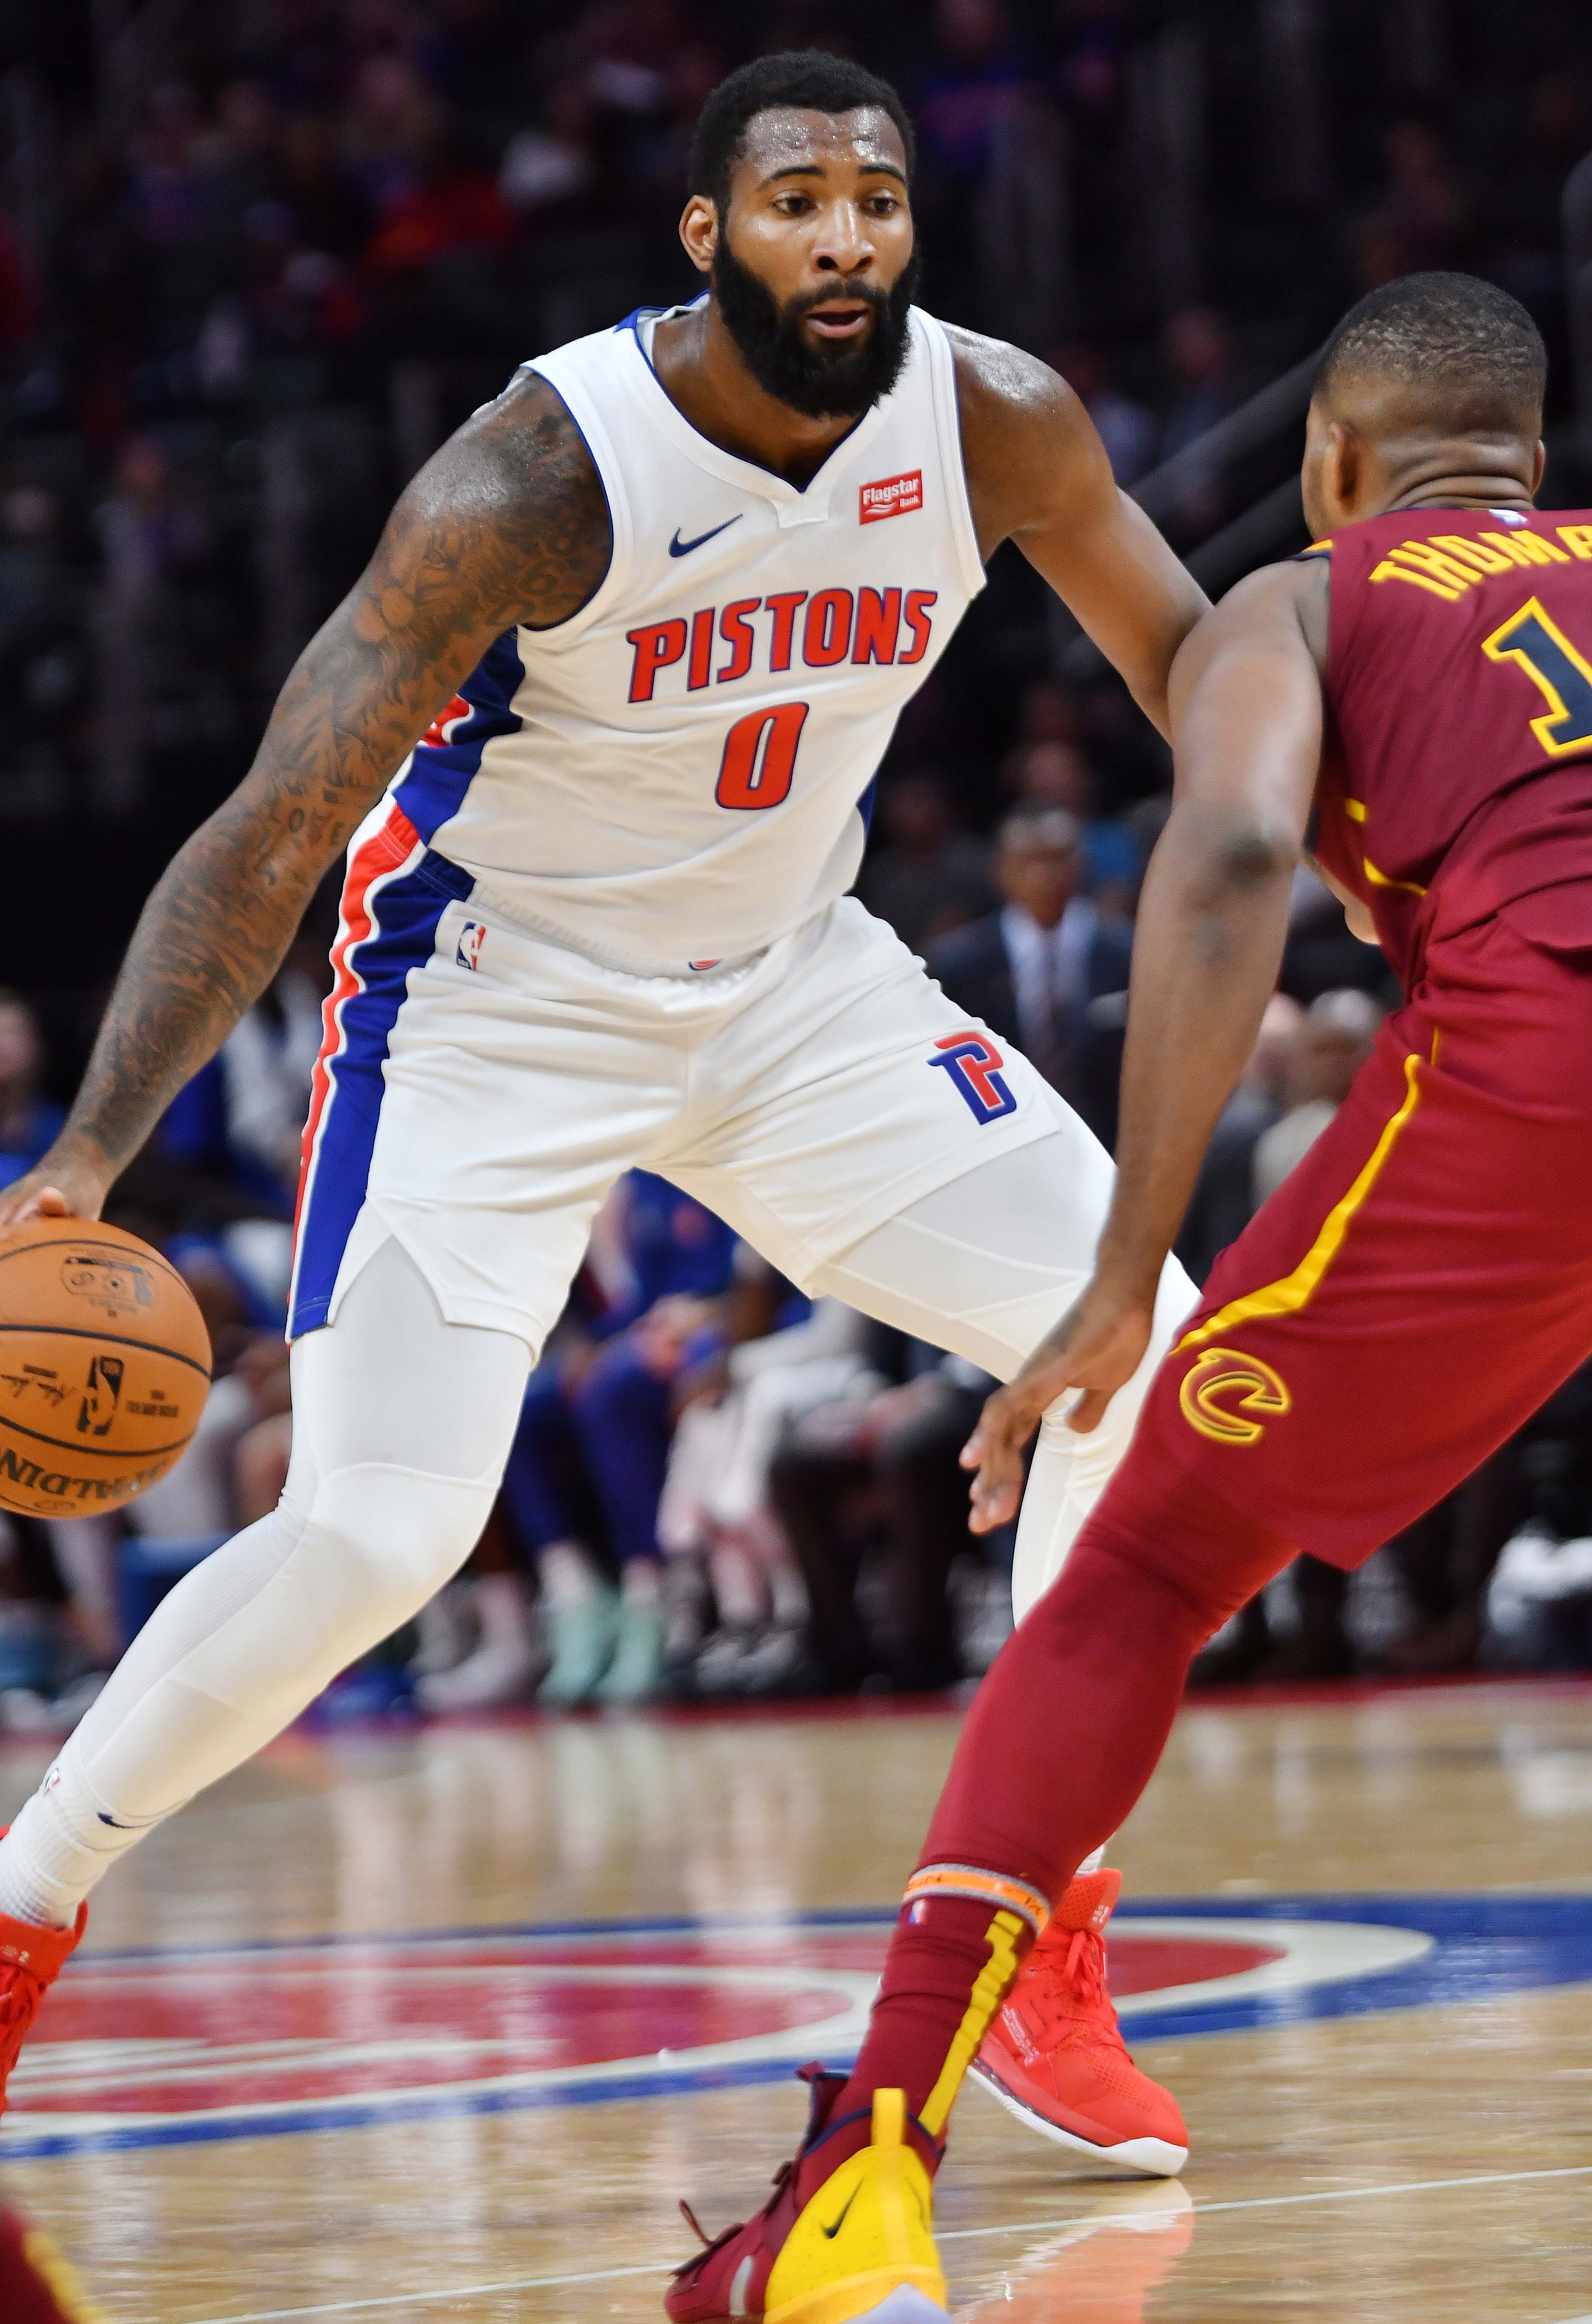 Andre Drummond: Age: 26. Ht: 6-11. Wt: 280. 2018-19 stats: 17.3 pts, 15.6 rebs, 1.7 blks. Outlook: Drummond had another dominant season on the boards and showed some improvement on both ends of the court, including as a rim protector. He could see more action as a perimeter passer, which will increase his assists.